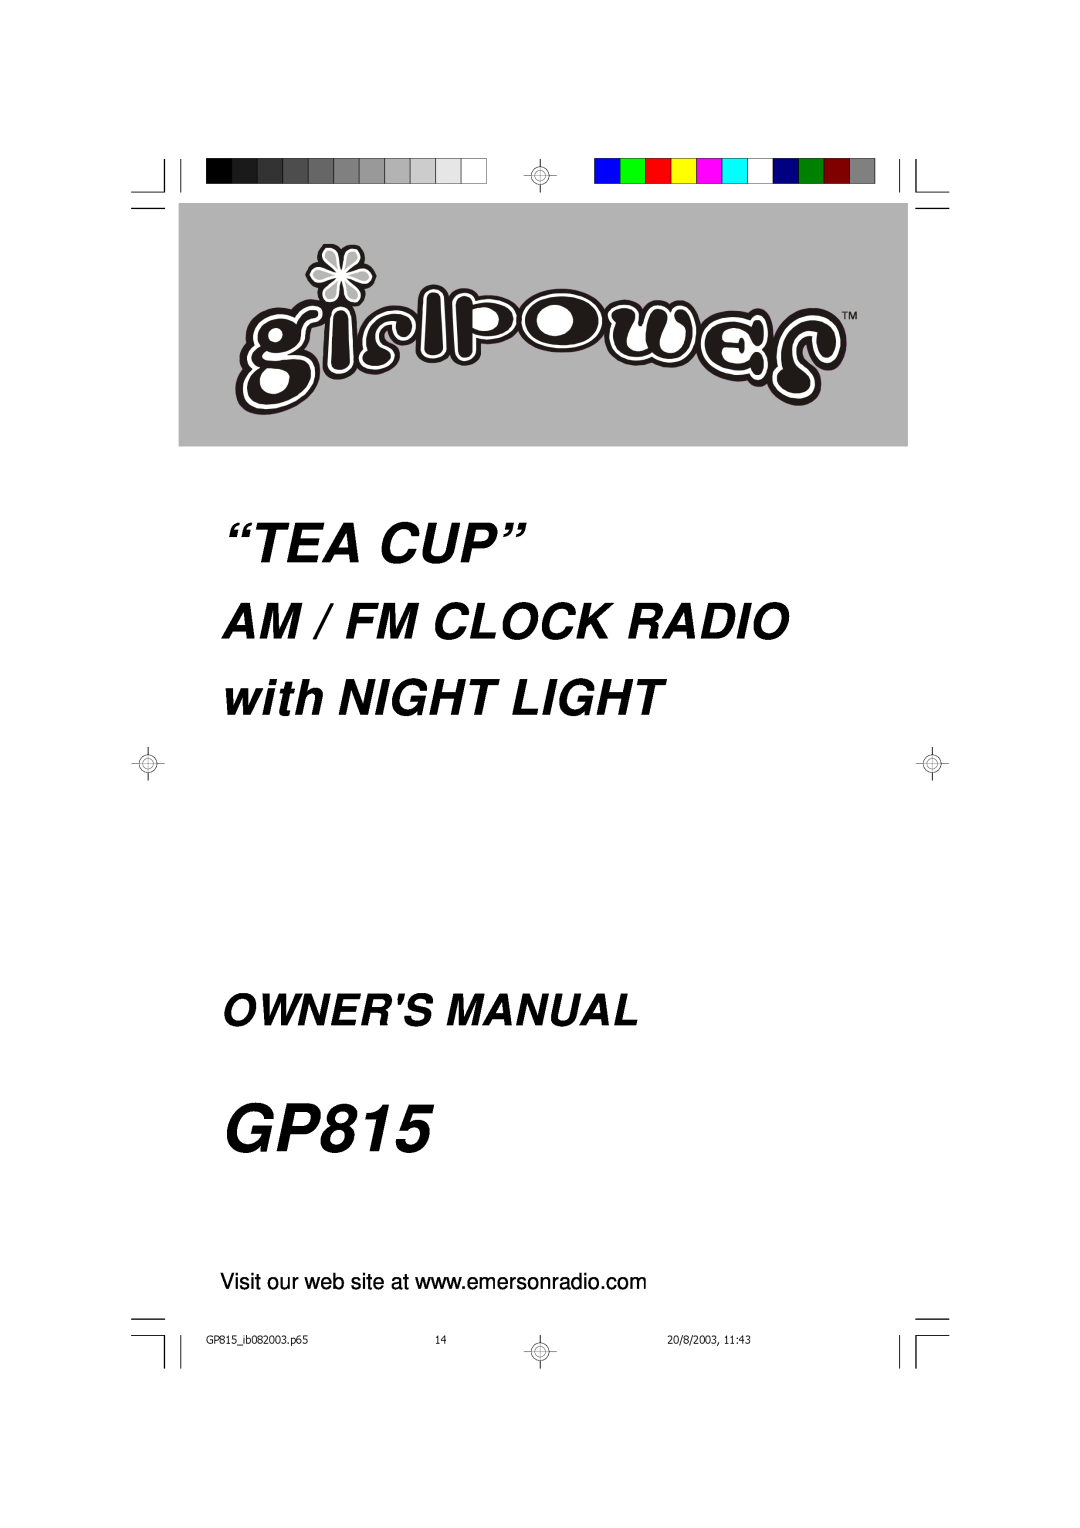 Emerson owner manual “Tea Cup”, AM / FM CLOCK RADIO with NIGHT LIGHT, Owners Manual, GP815ib082003.p65, 20/8/2003 